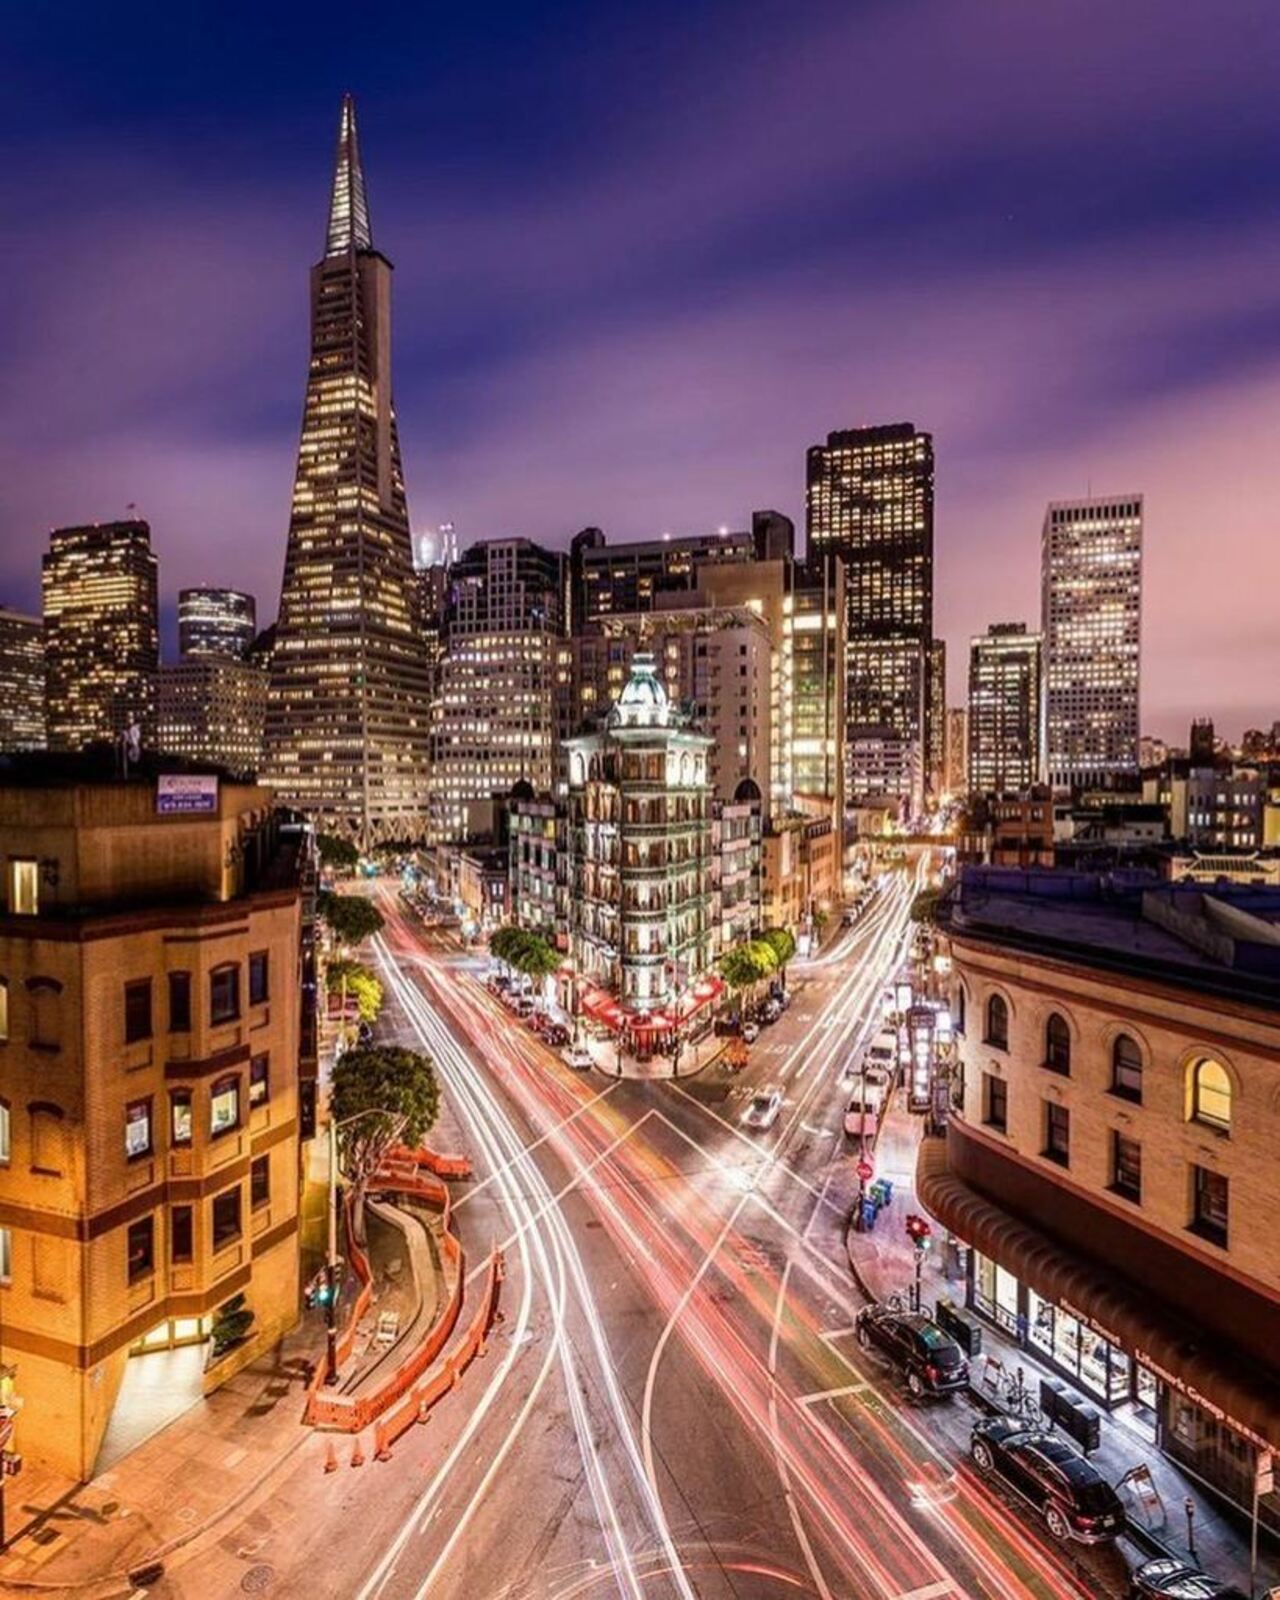 It's that time of year when San Francisco is always illuminated. Come visit now during the Illuminate SF Festival of Light. Click the link in our bio to learn more.  #Alwayssf #illuminatesf #lightart Photo by @brandontaoka. Check out his feed and … http://ift.tt/2zKhdbo https://t.co/vI3pvZry4A